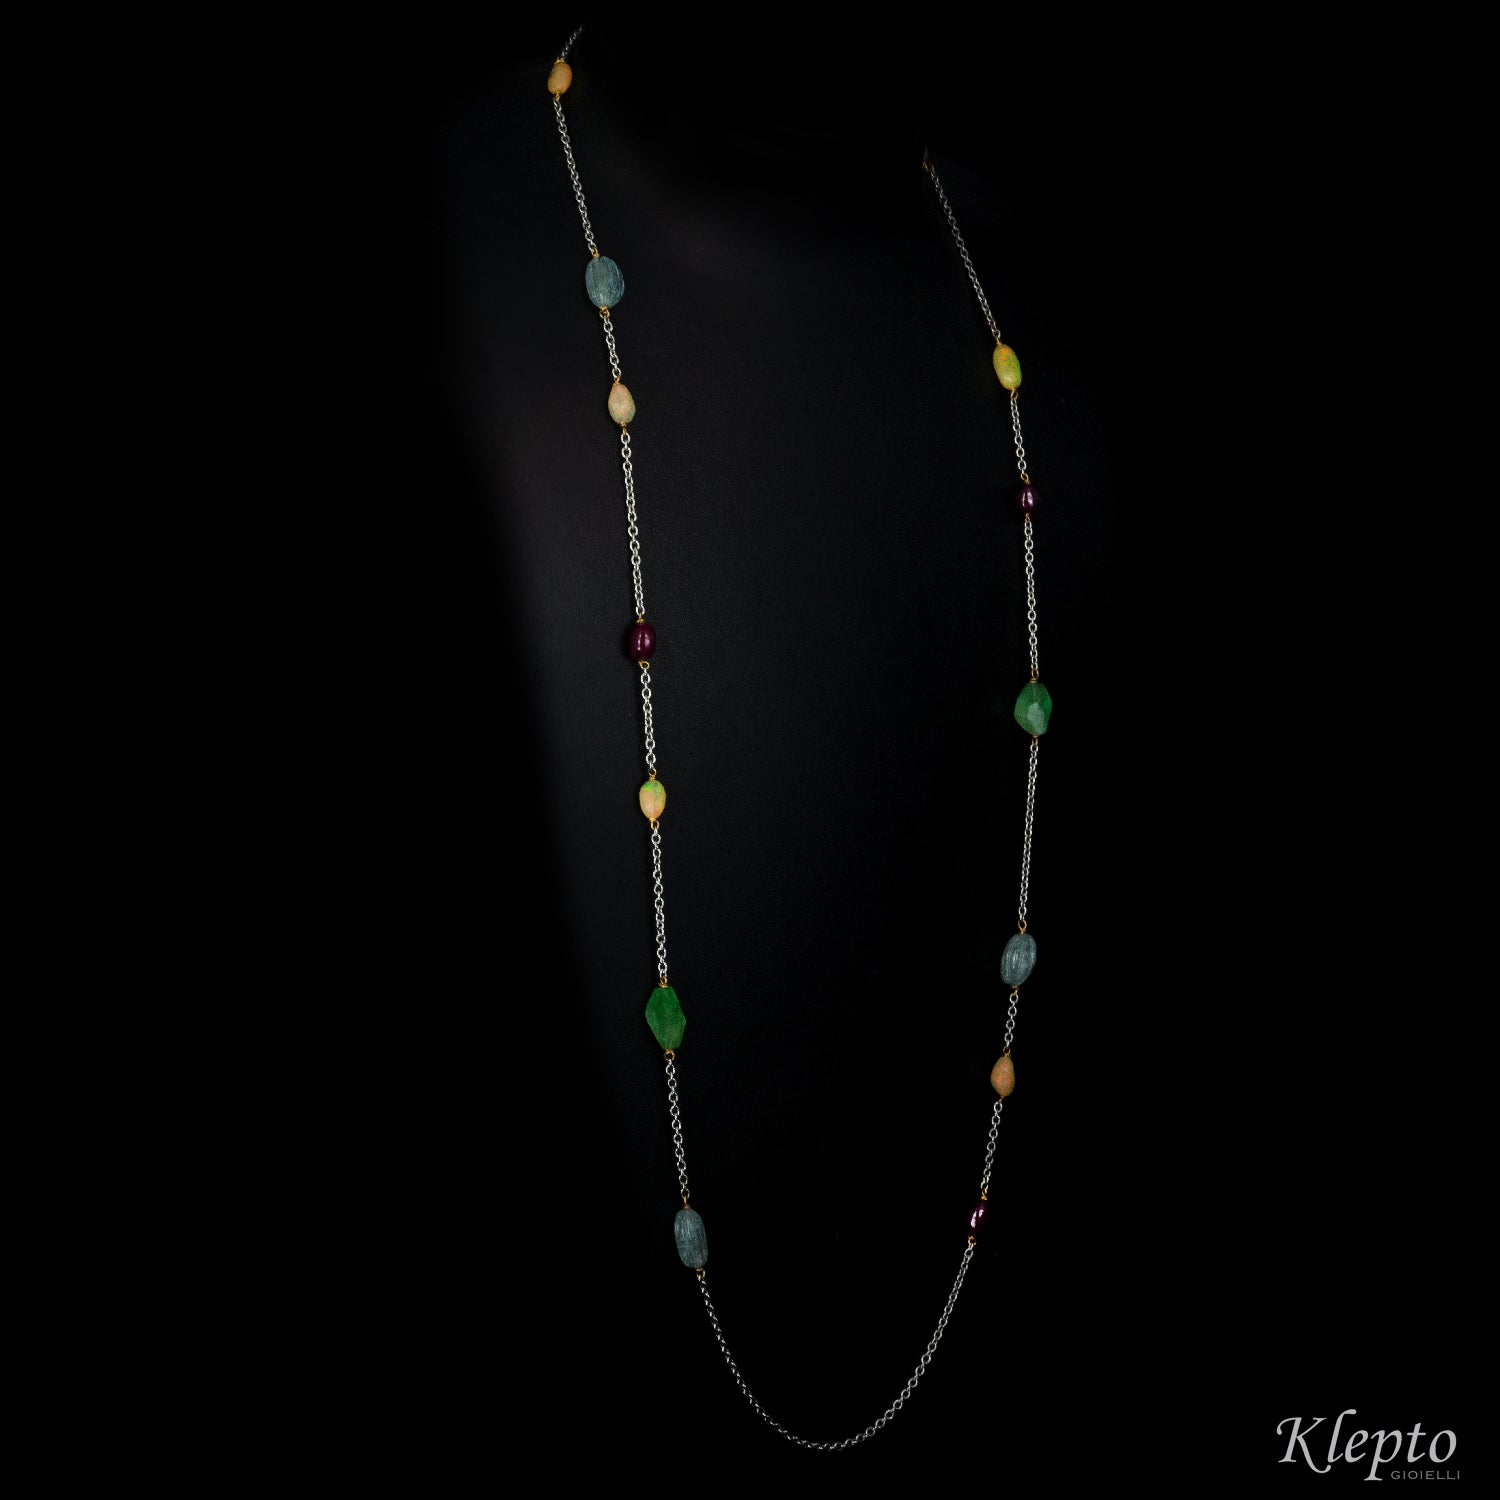 "Chanel" white gold necklace with Aquamarines, Rubies, Opals and Emeralds